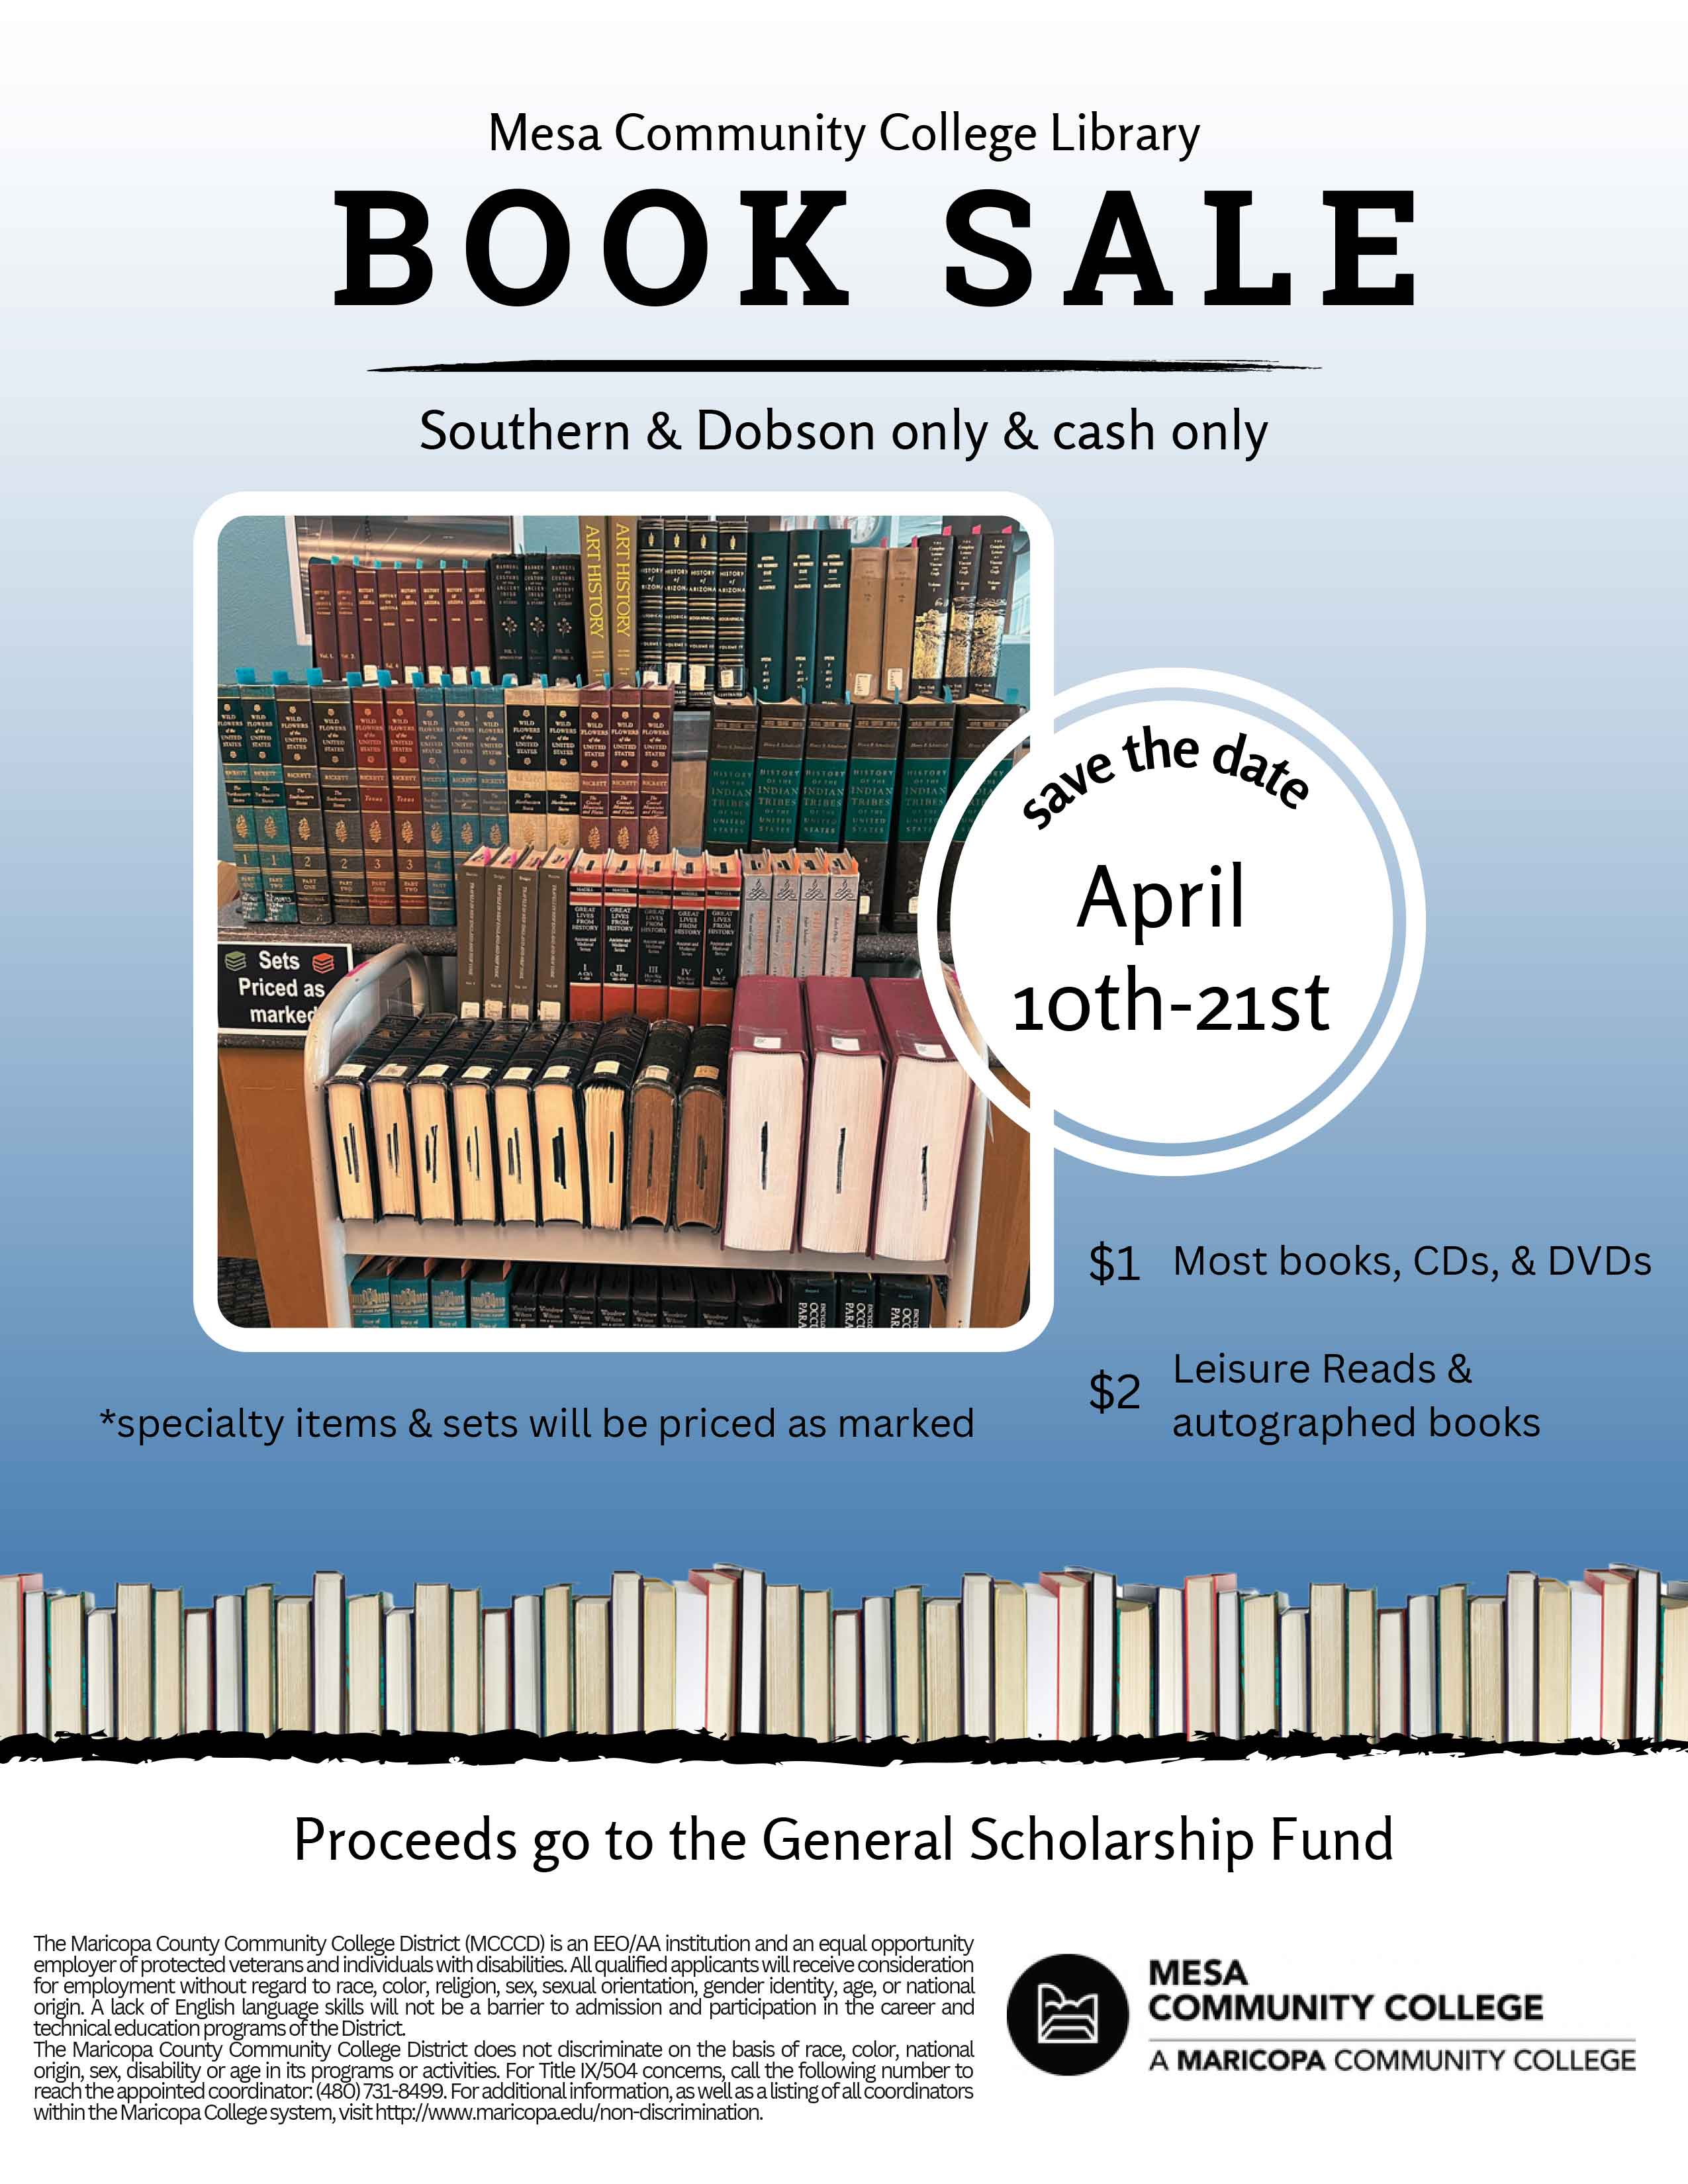 Friends of the Macon County Public Library Bookstore hosting half-price  sale March 31, April 1 - The Southern Scoop